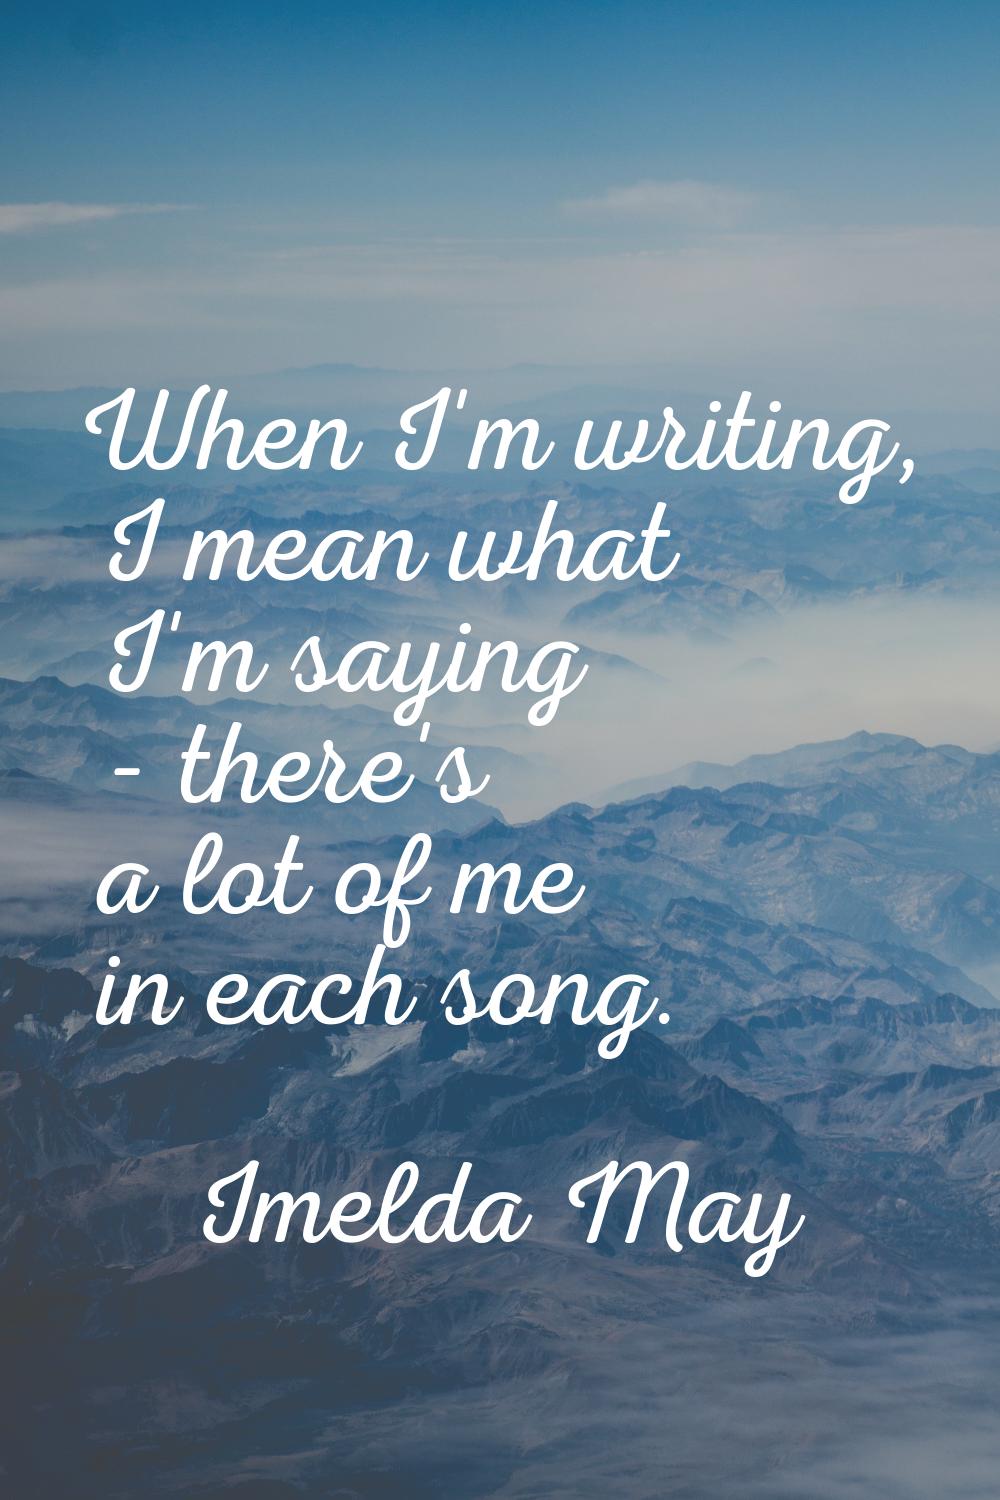 When I'm writing, I mean what I'm saying - there's a lot of me in each song.